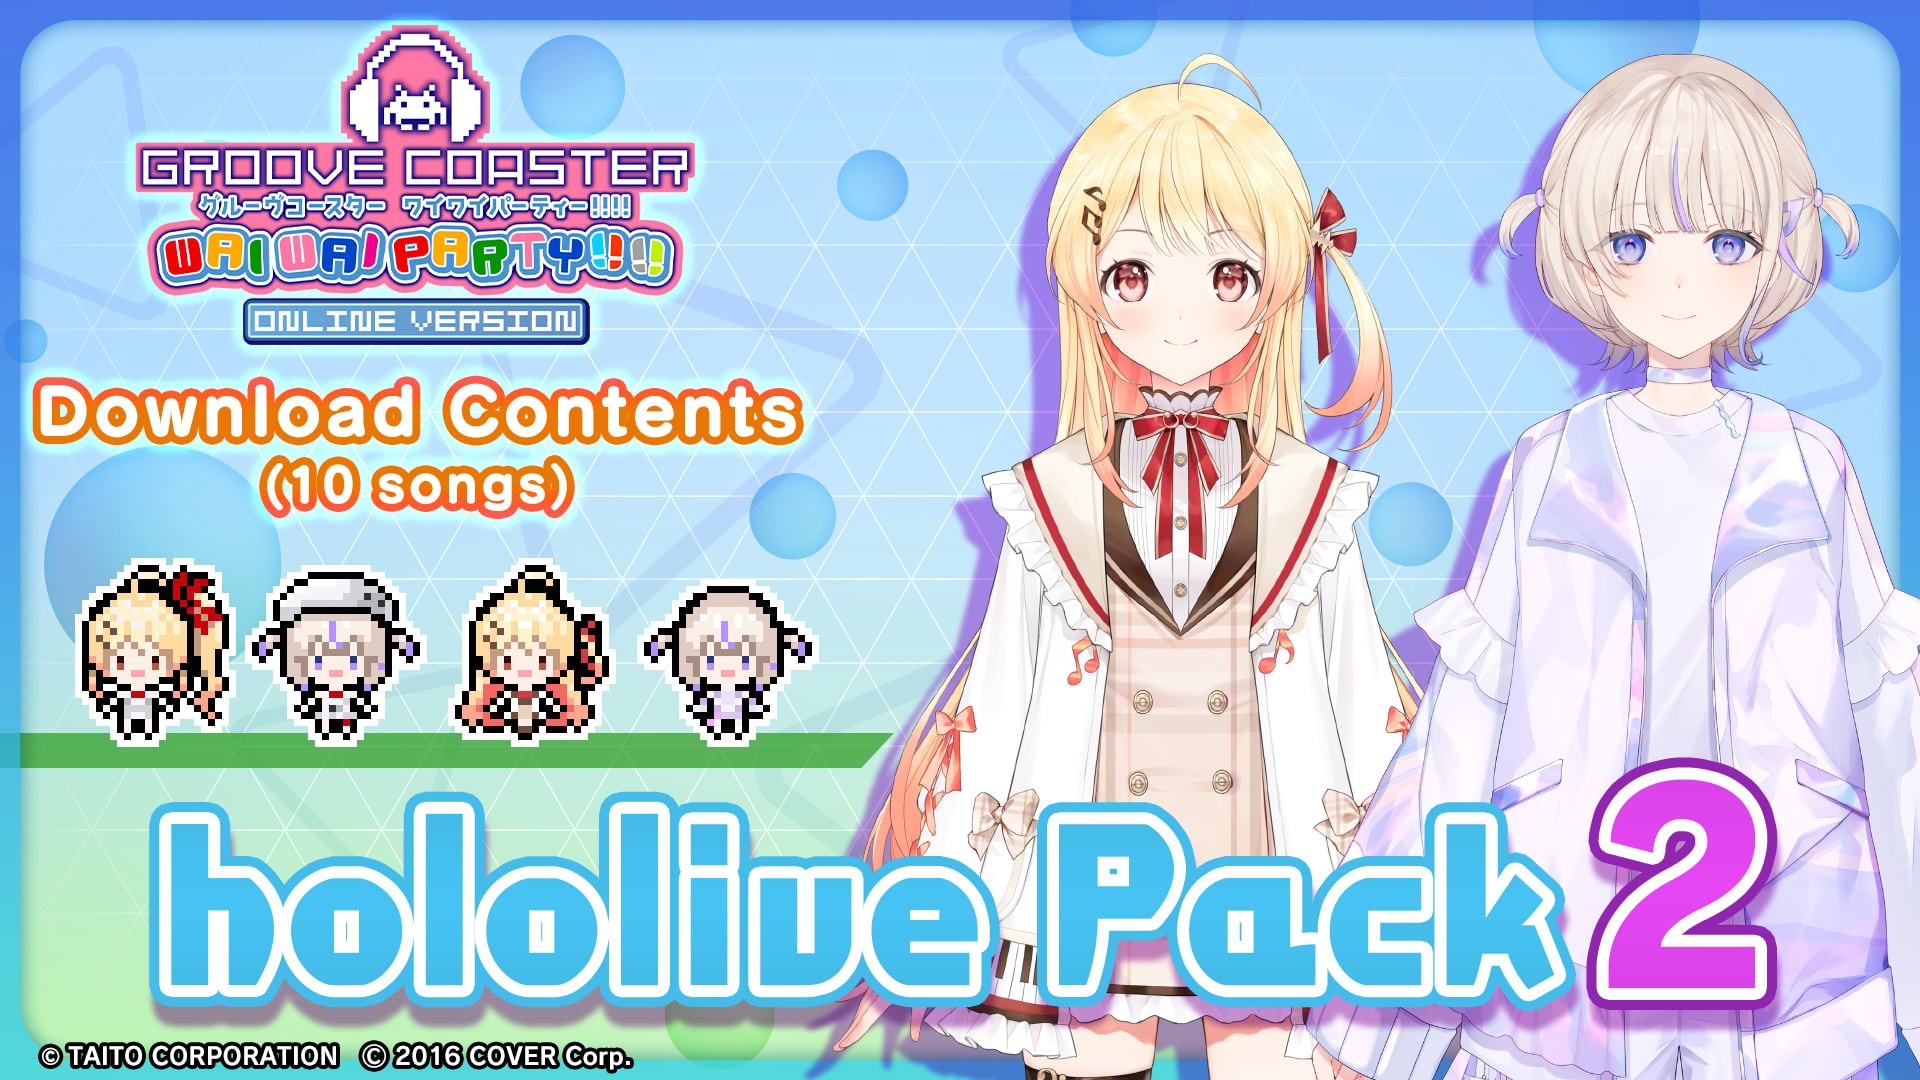 hololive Pack 2